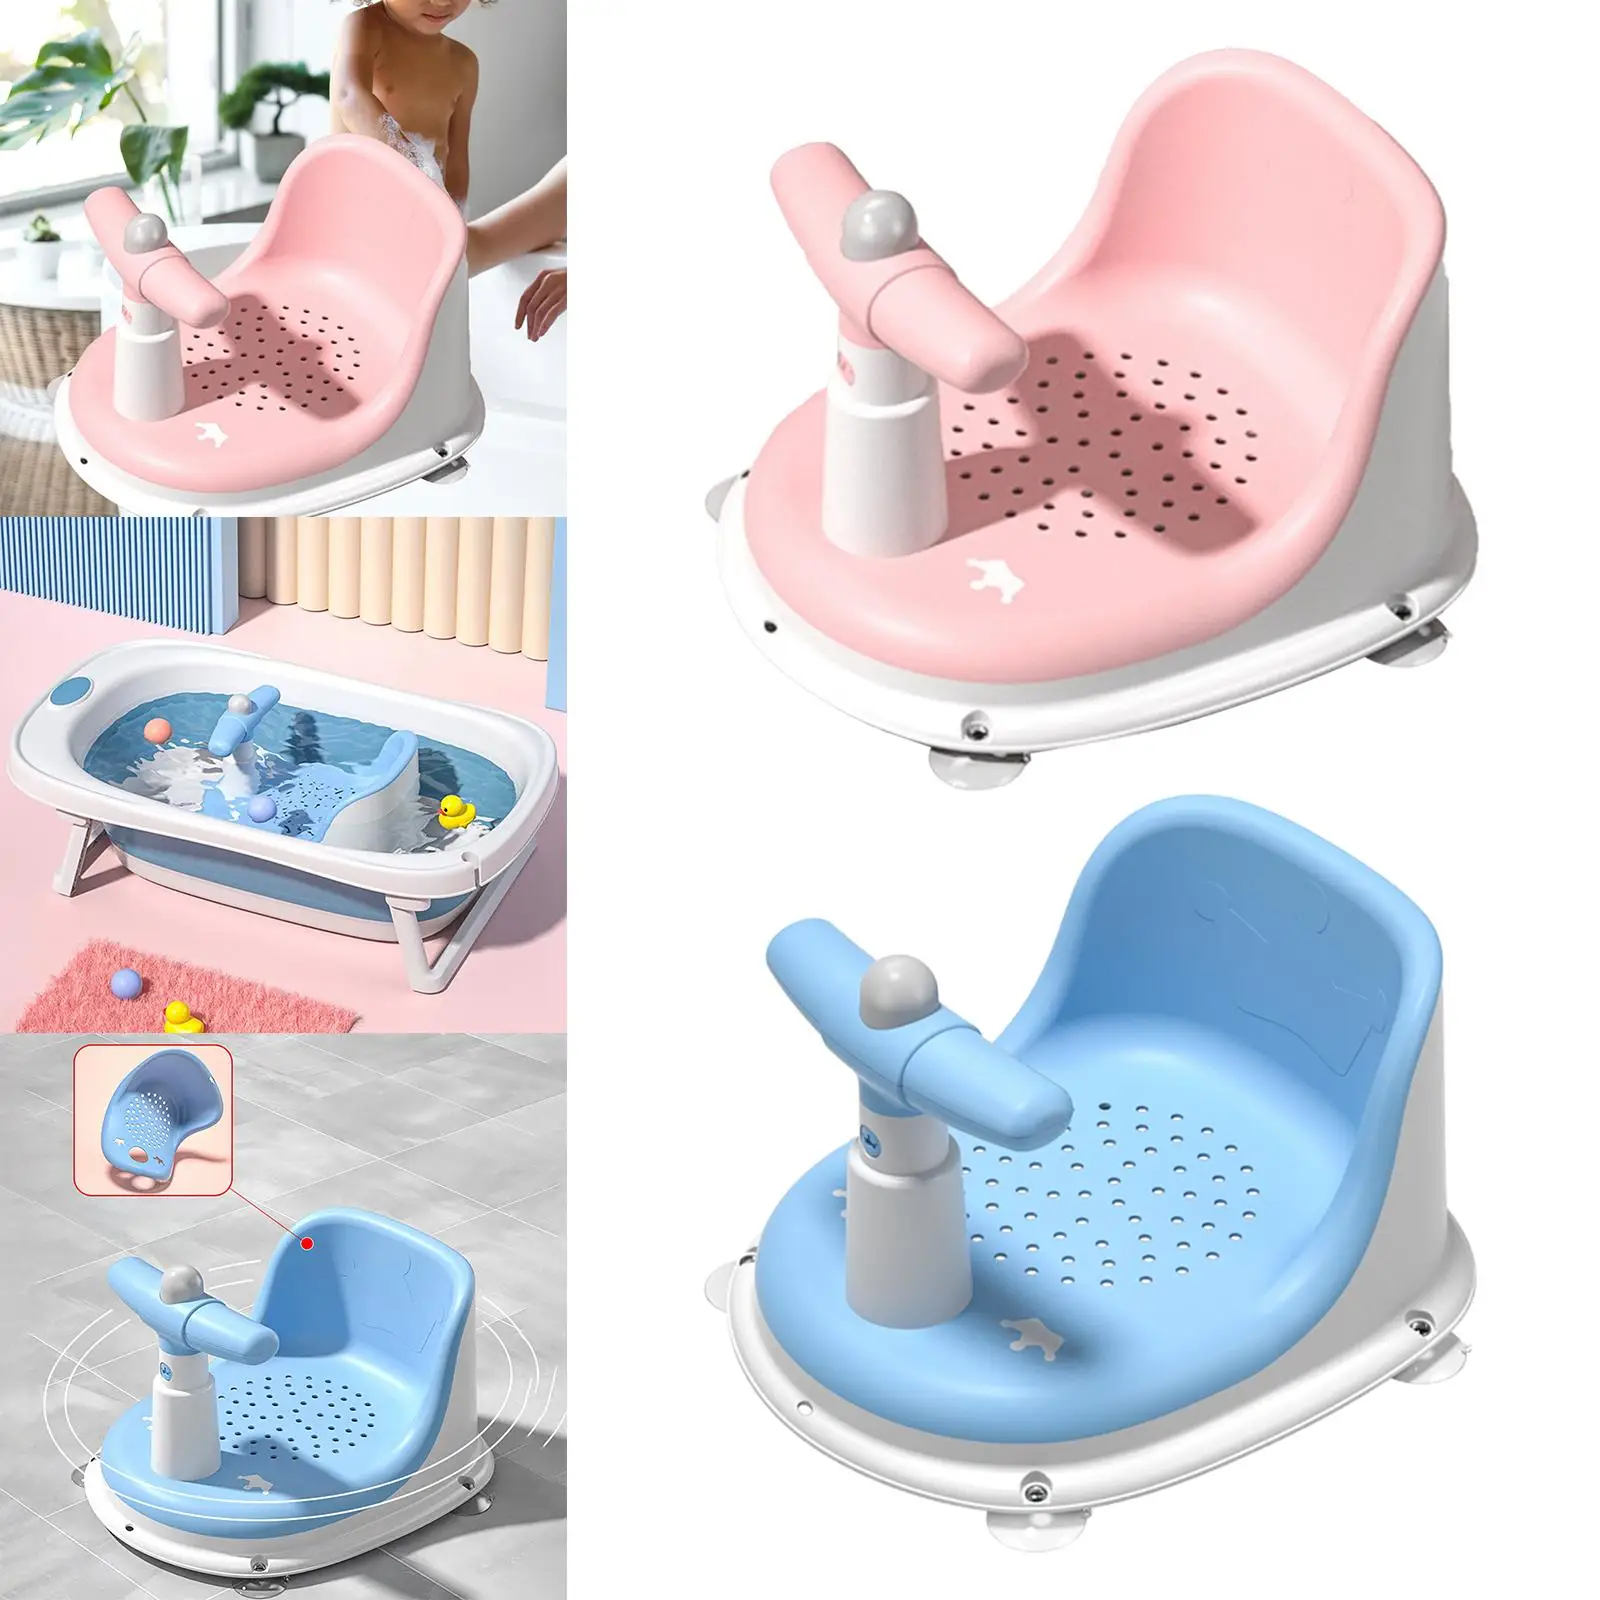 Baby Bath Seat Foldable Fashionable Hanging Soft Mat Comfortable Stable with